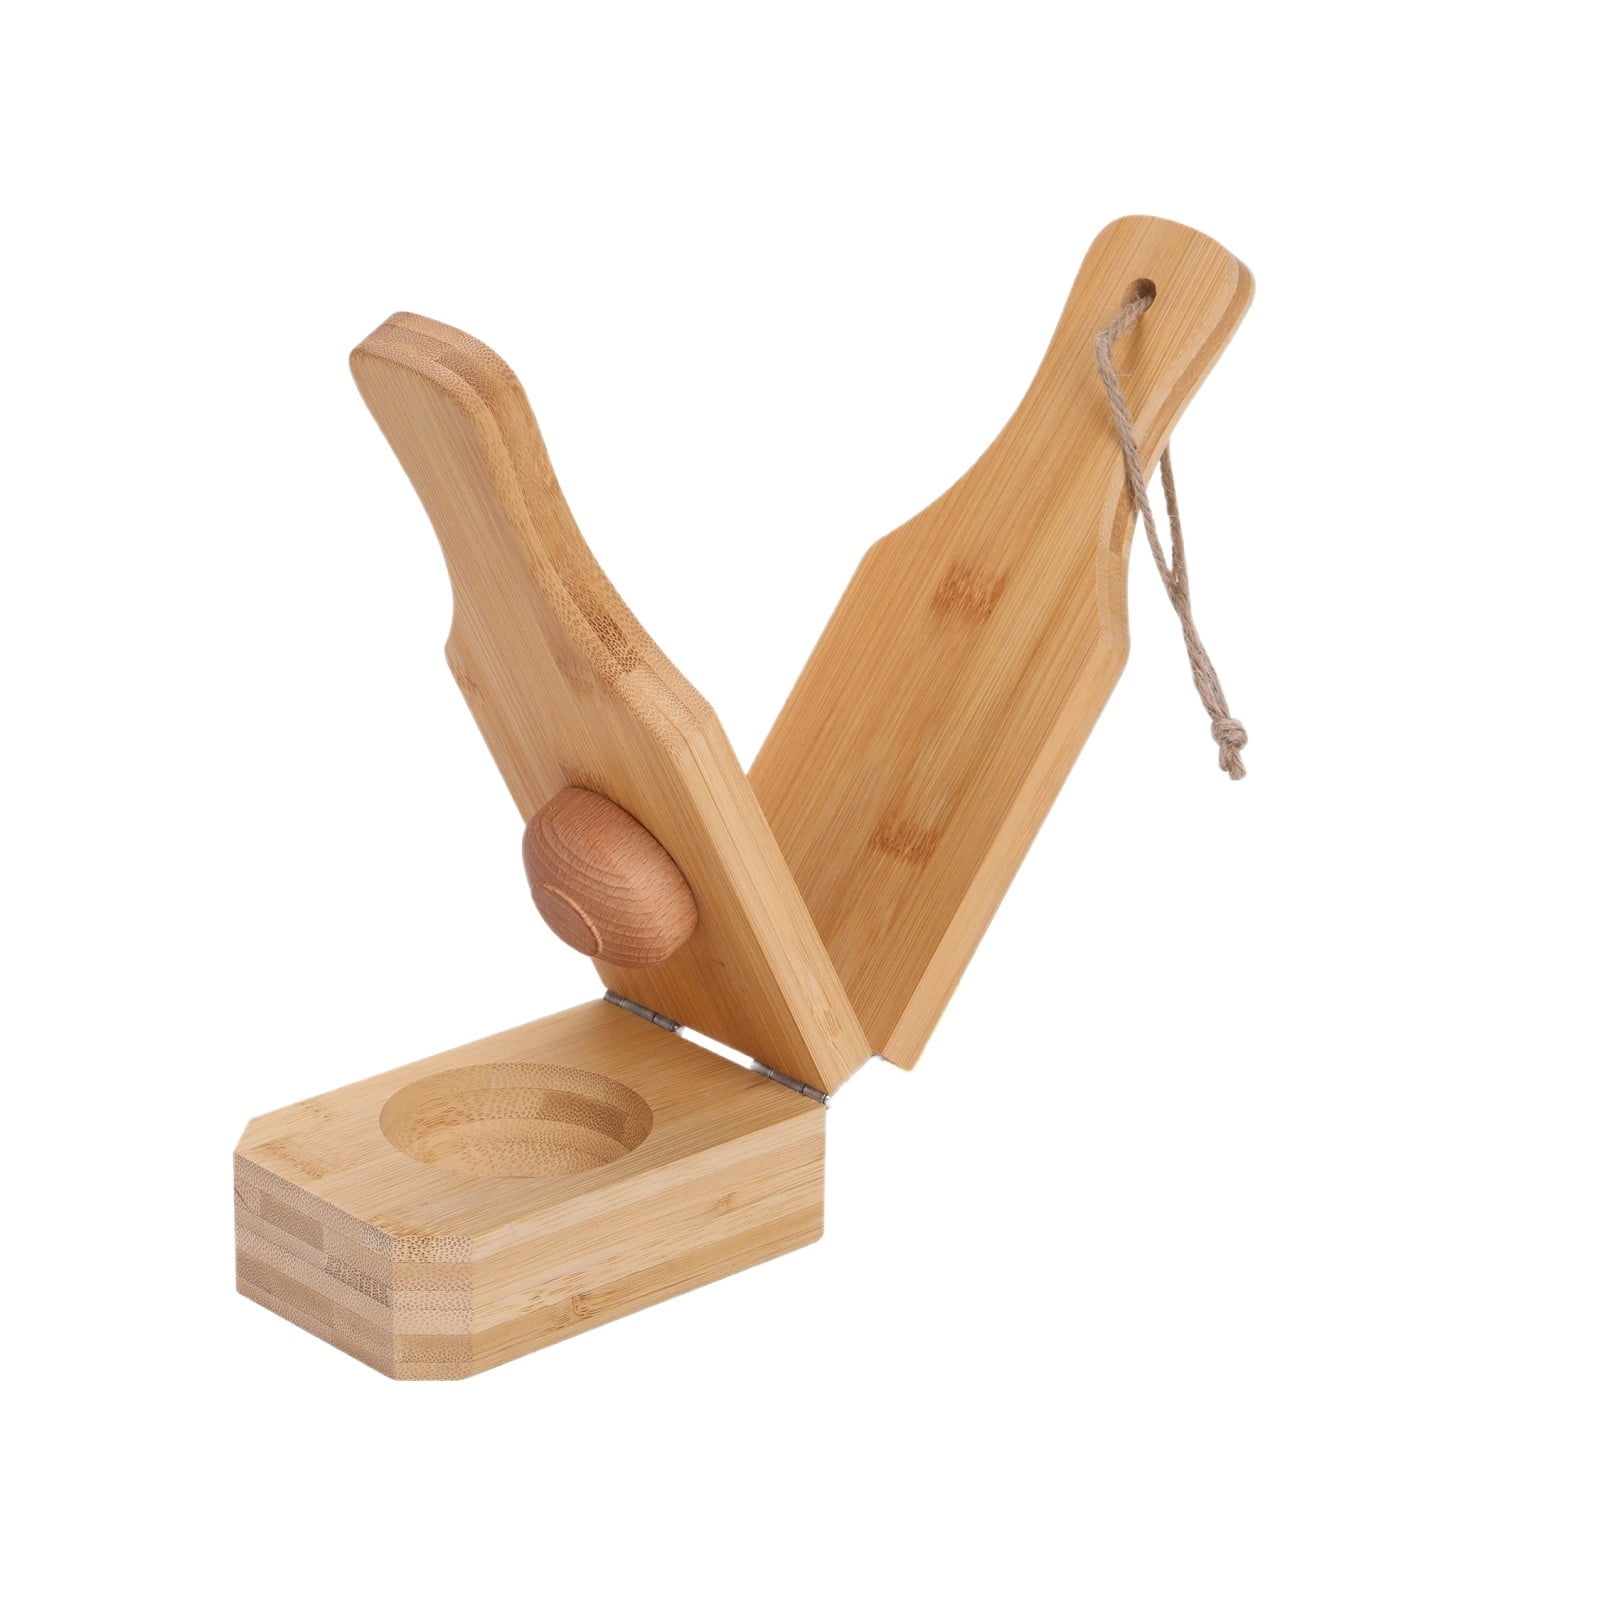 XUT Wooden Tostonera Plantain Press Banana Smasher Maker, 2 in 1 Tostonera  Toston Maker, Kitchen Gadgets for Fried Plantains Chips, Tostones Cups and